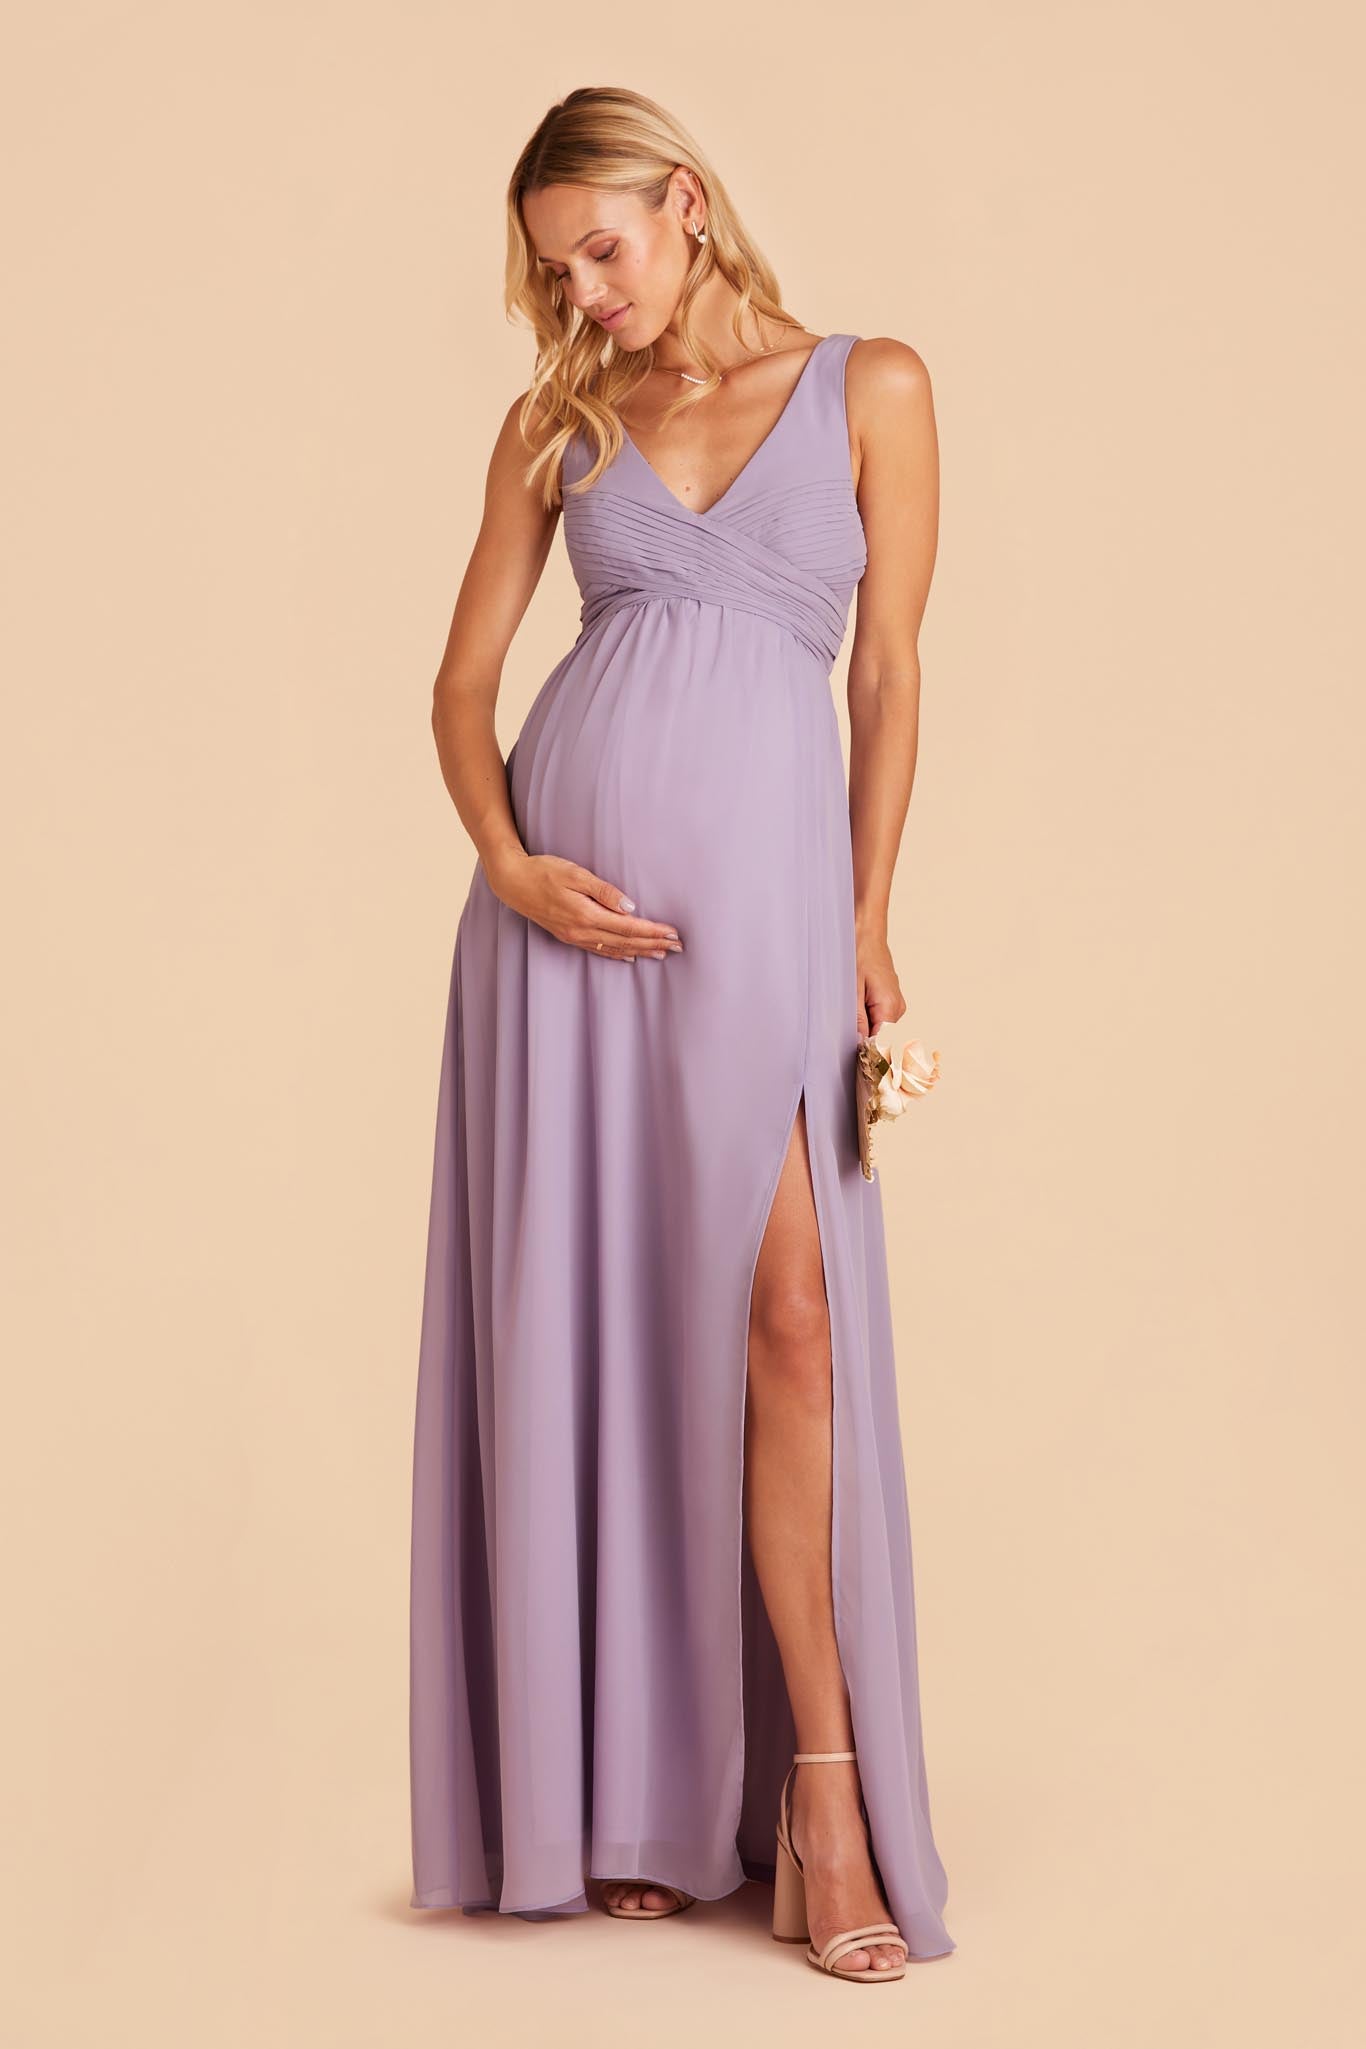 Lavender Laurie Empire Dress by Birdy Grey